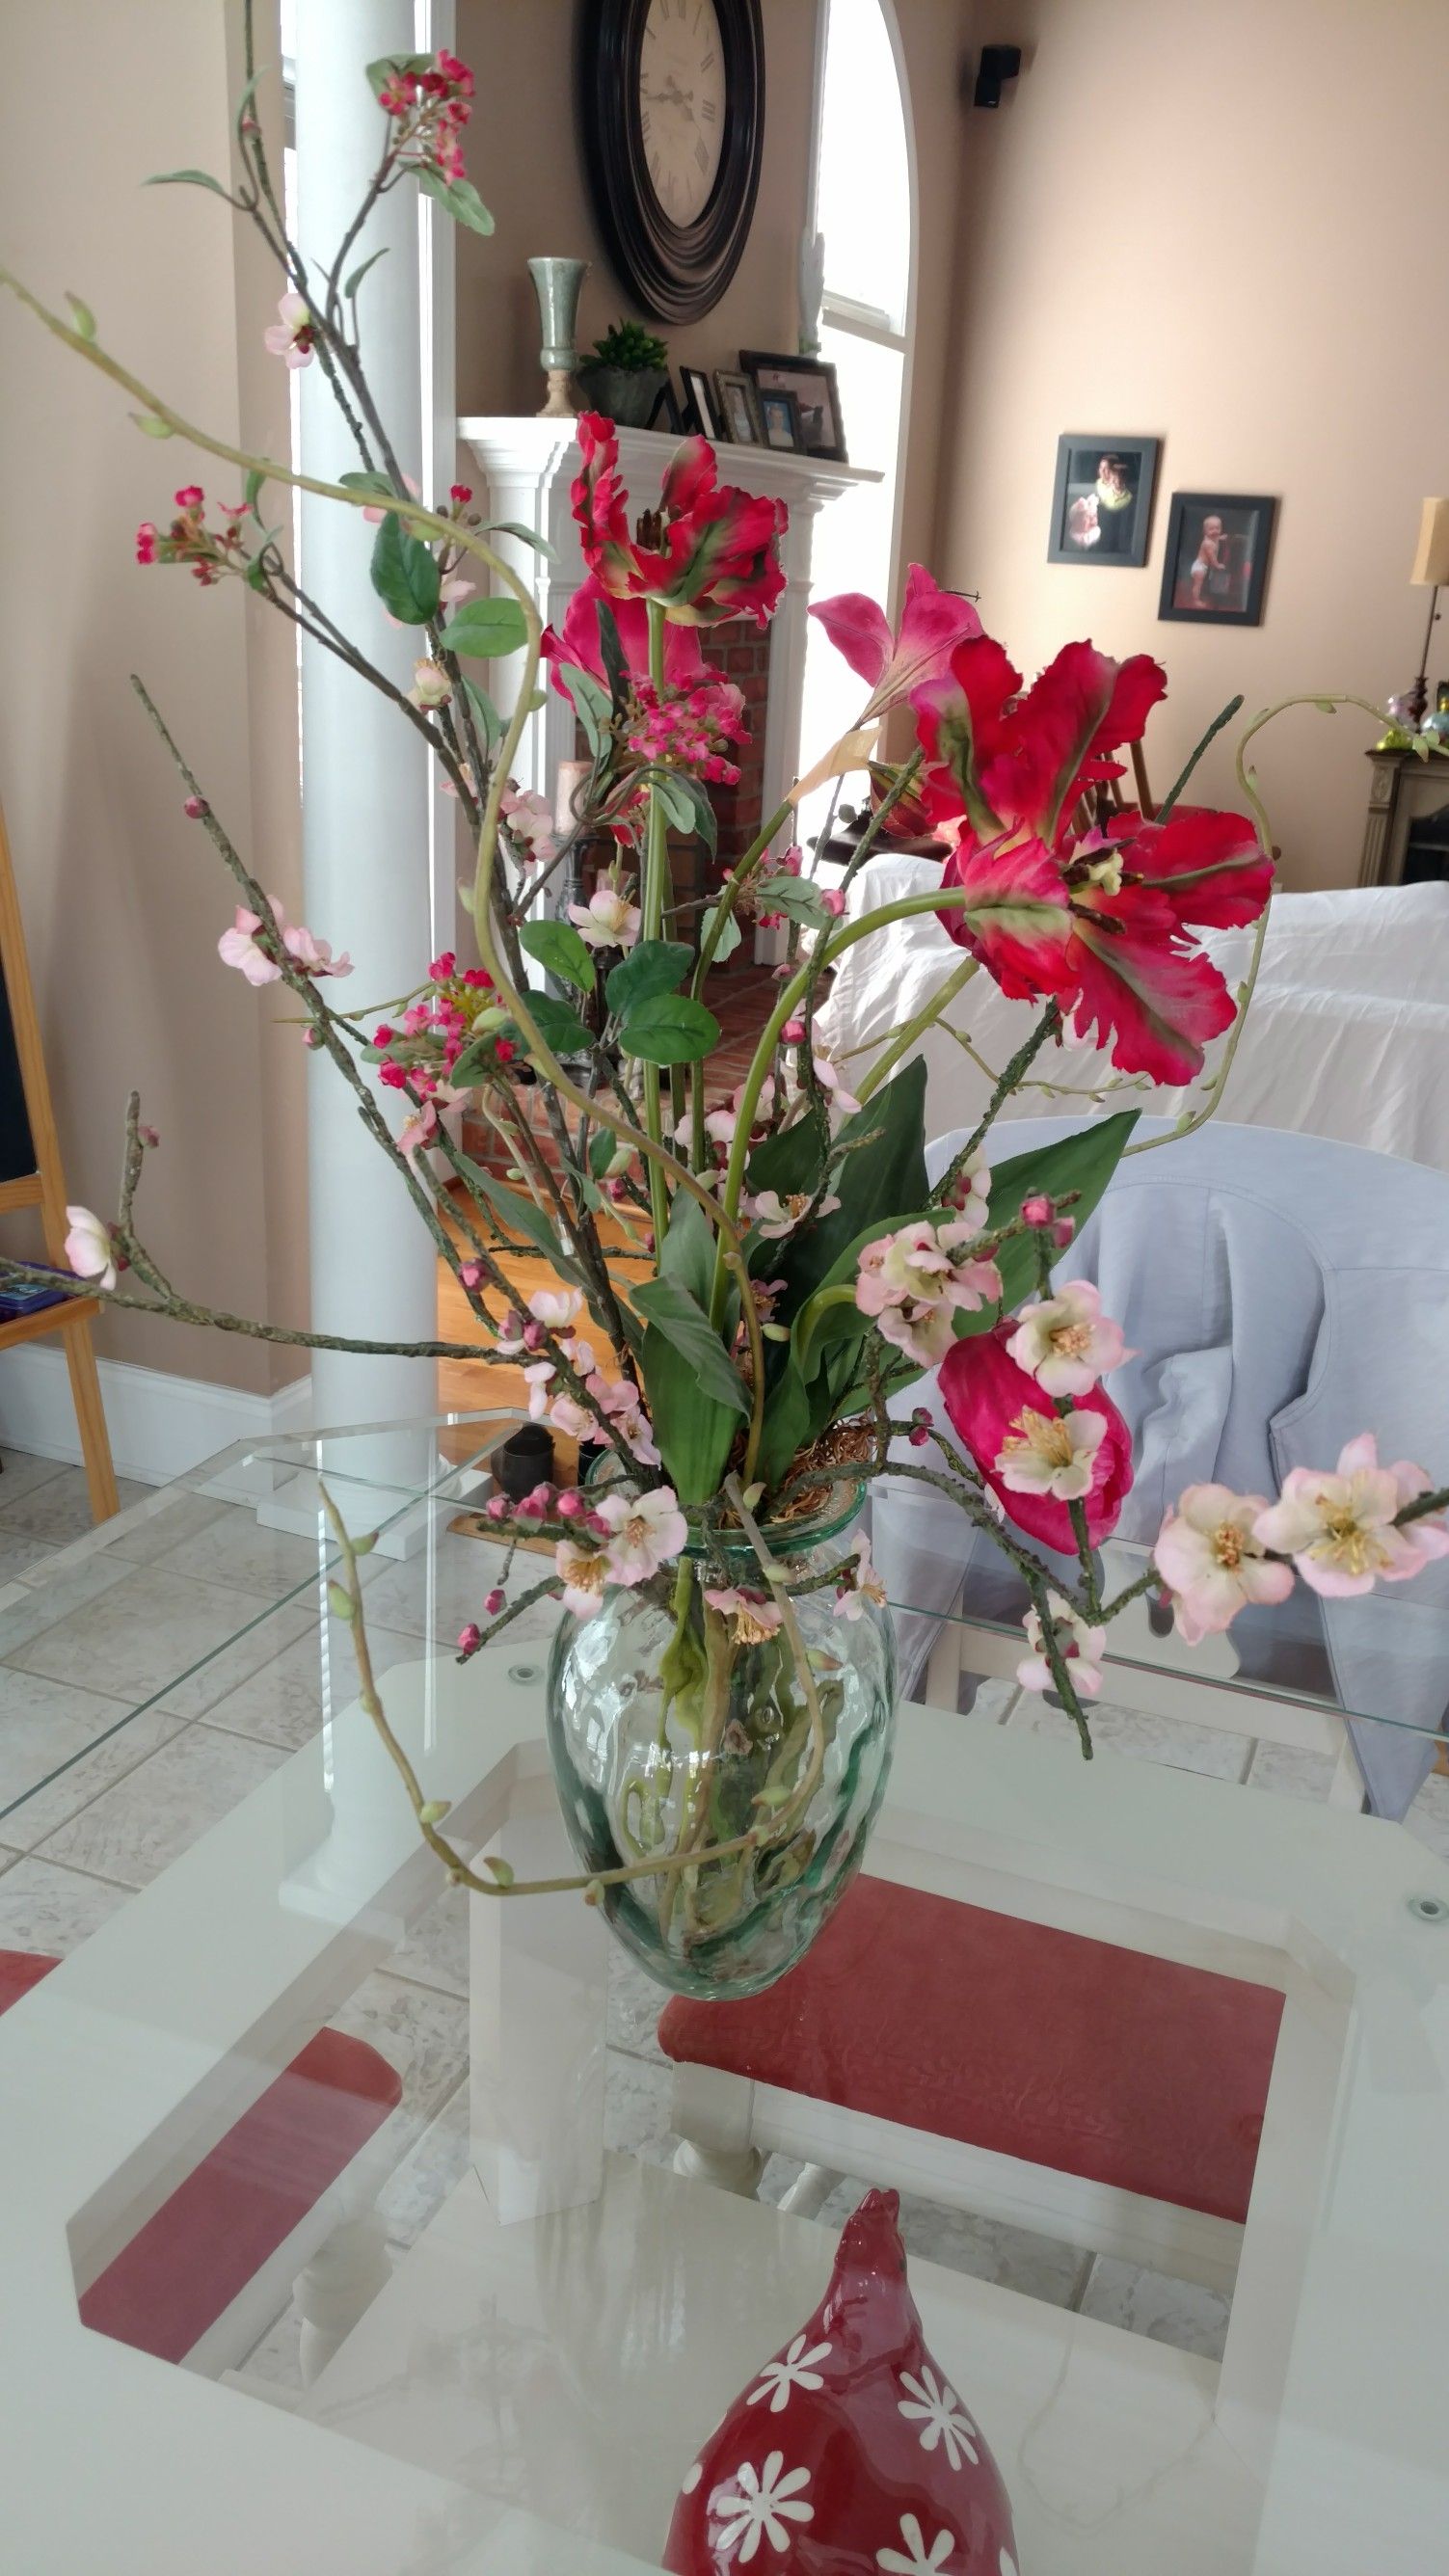 Nice center piece glass vase clear red and pink flowers